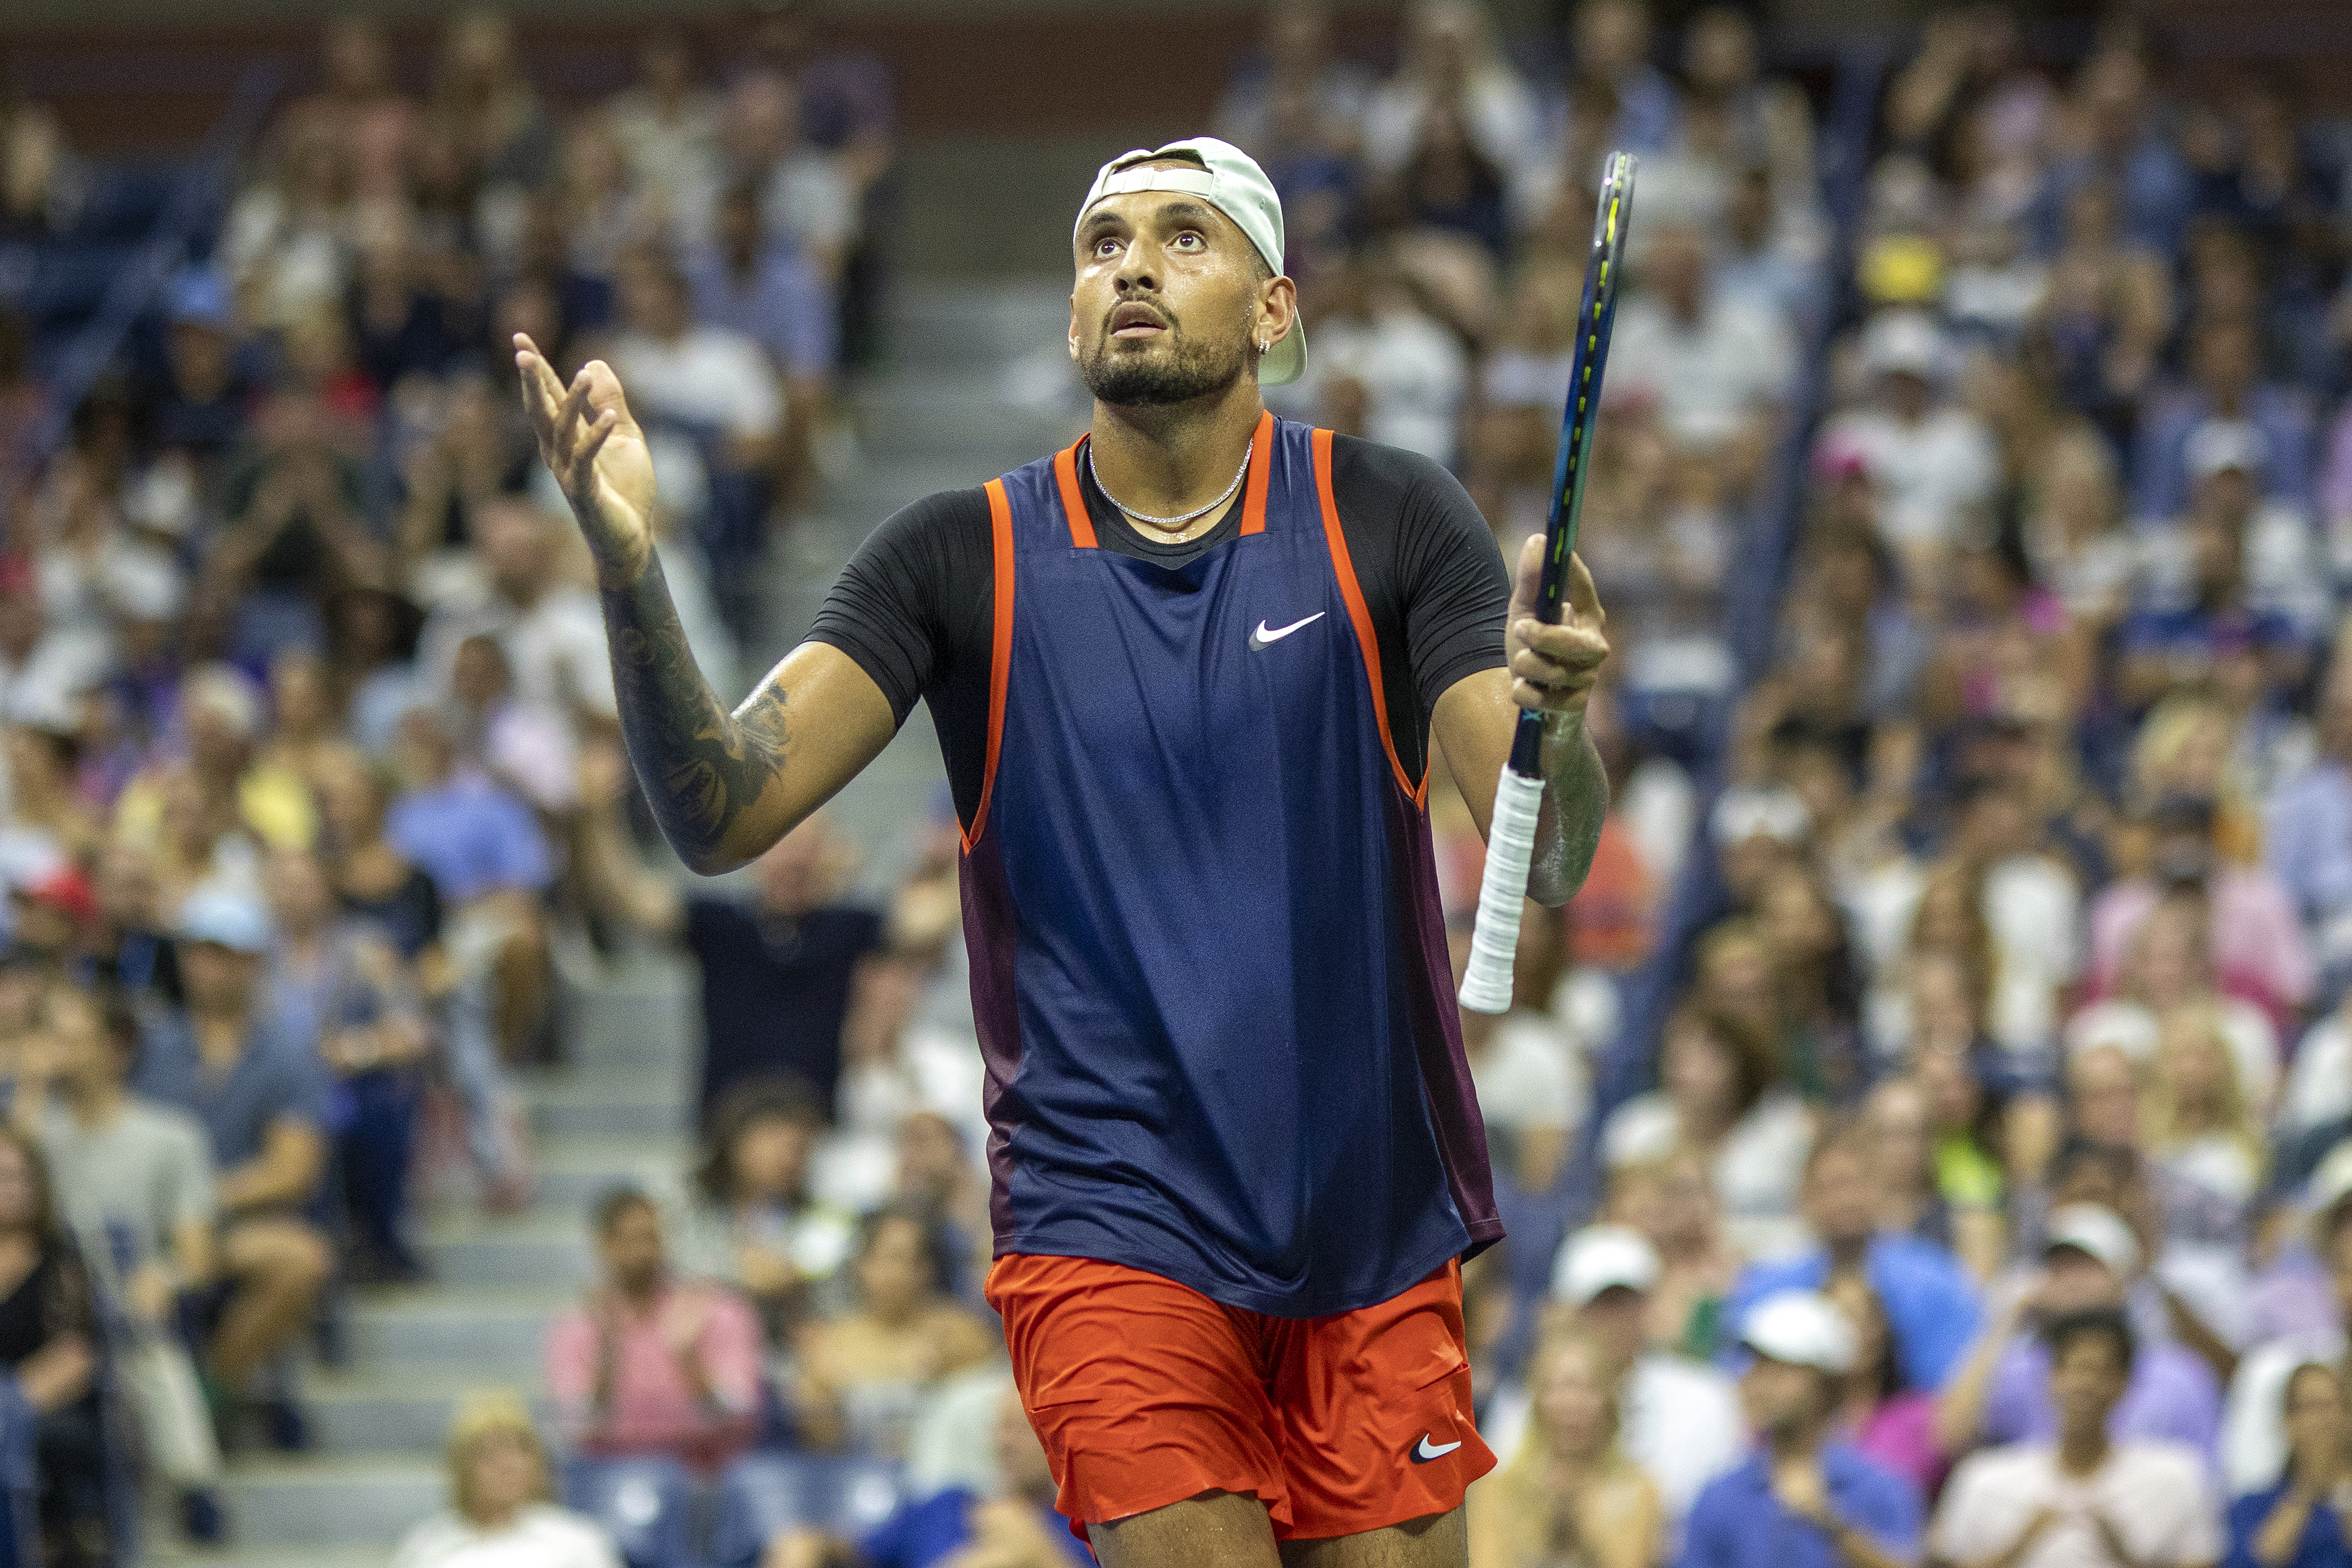 Nick Kyrgios of Australia reacts during his match against Daniil Medvedev of Russia in the Men’s Singles fourth round match on Arthur Ashe Stadium during the US Open Tennis Championship 2022 at the USTA National Tennis Centre on September 4th 2022 in Flushing, Queens, New York City.